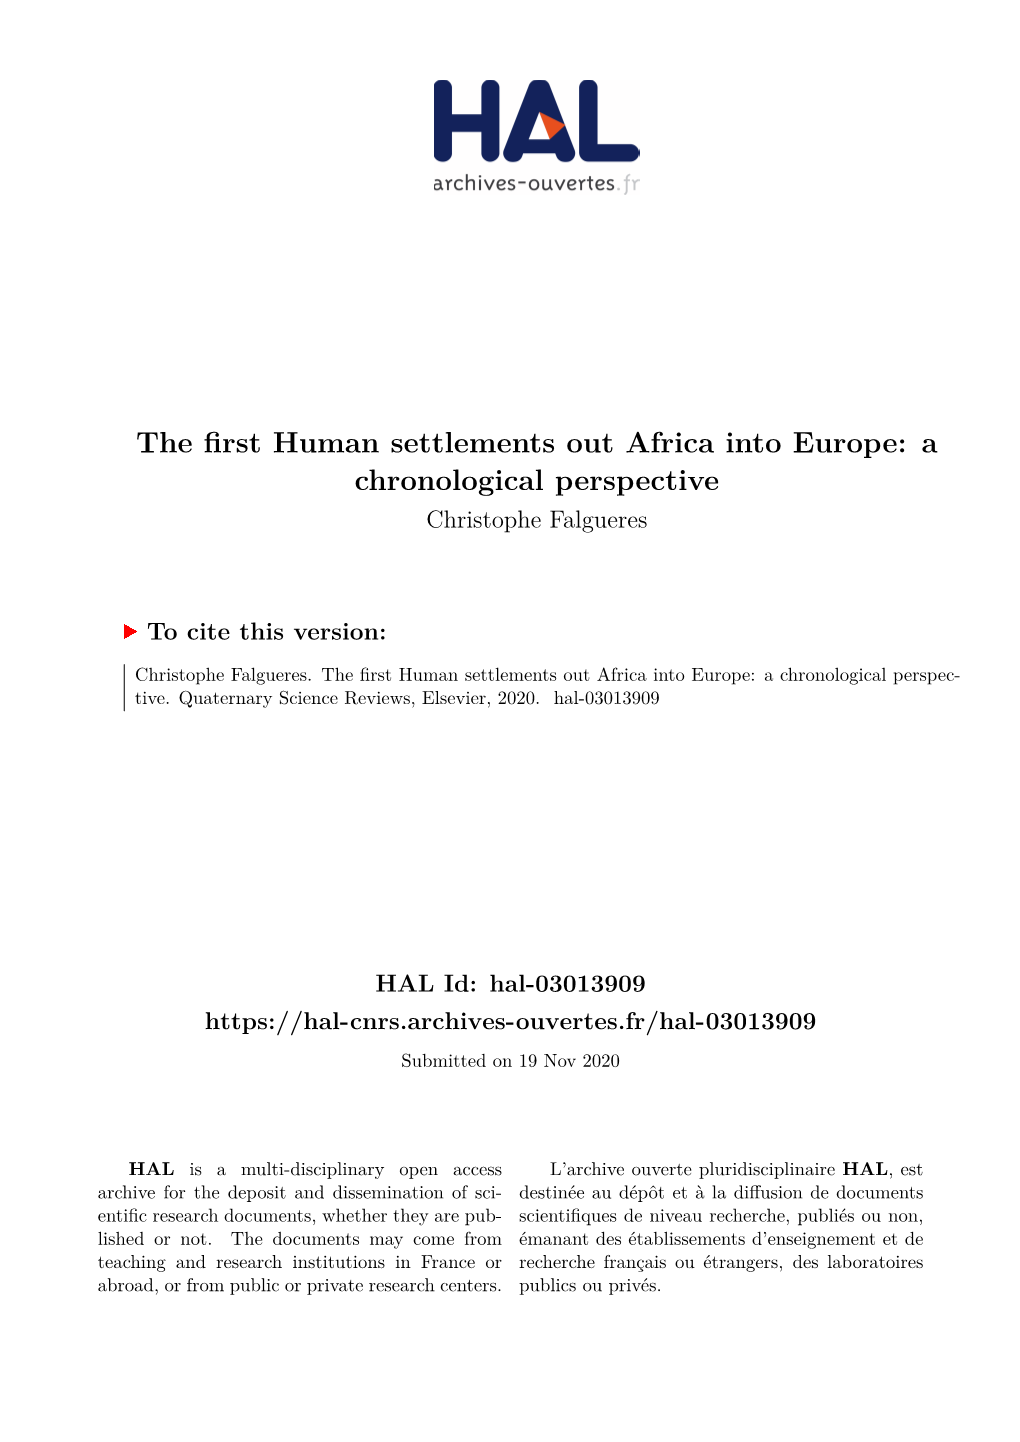 The First Human Settlements out Africa Into Europe: a Chronological Perspective Christophe Falgueres